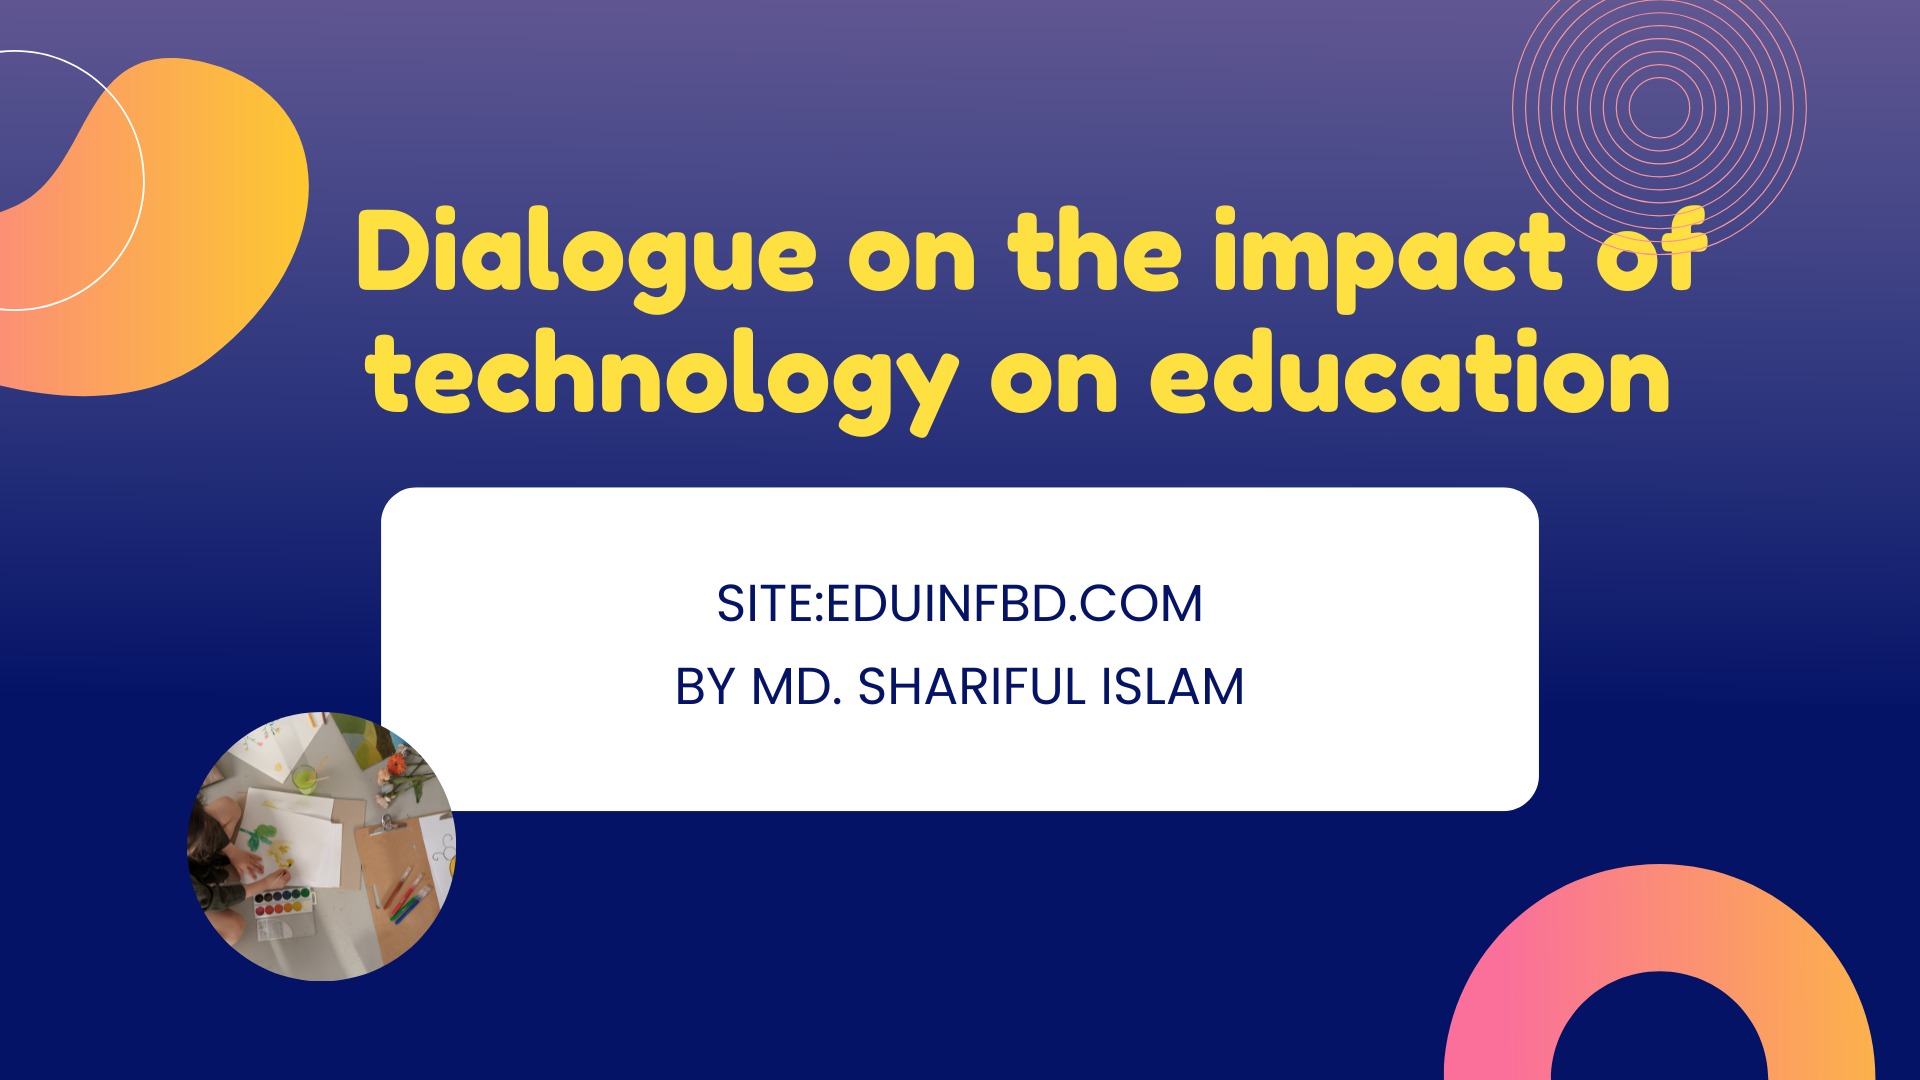 Dialogue on the impact of technology on education